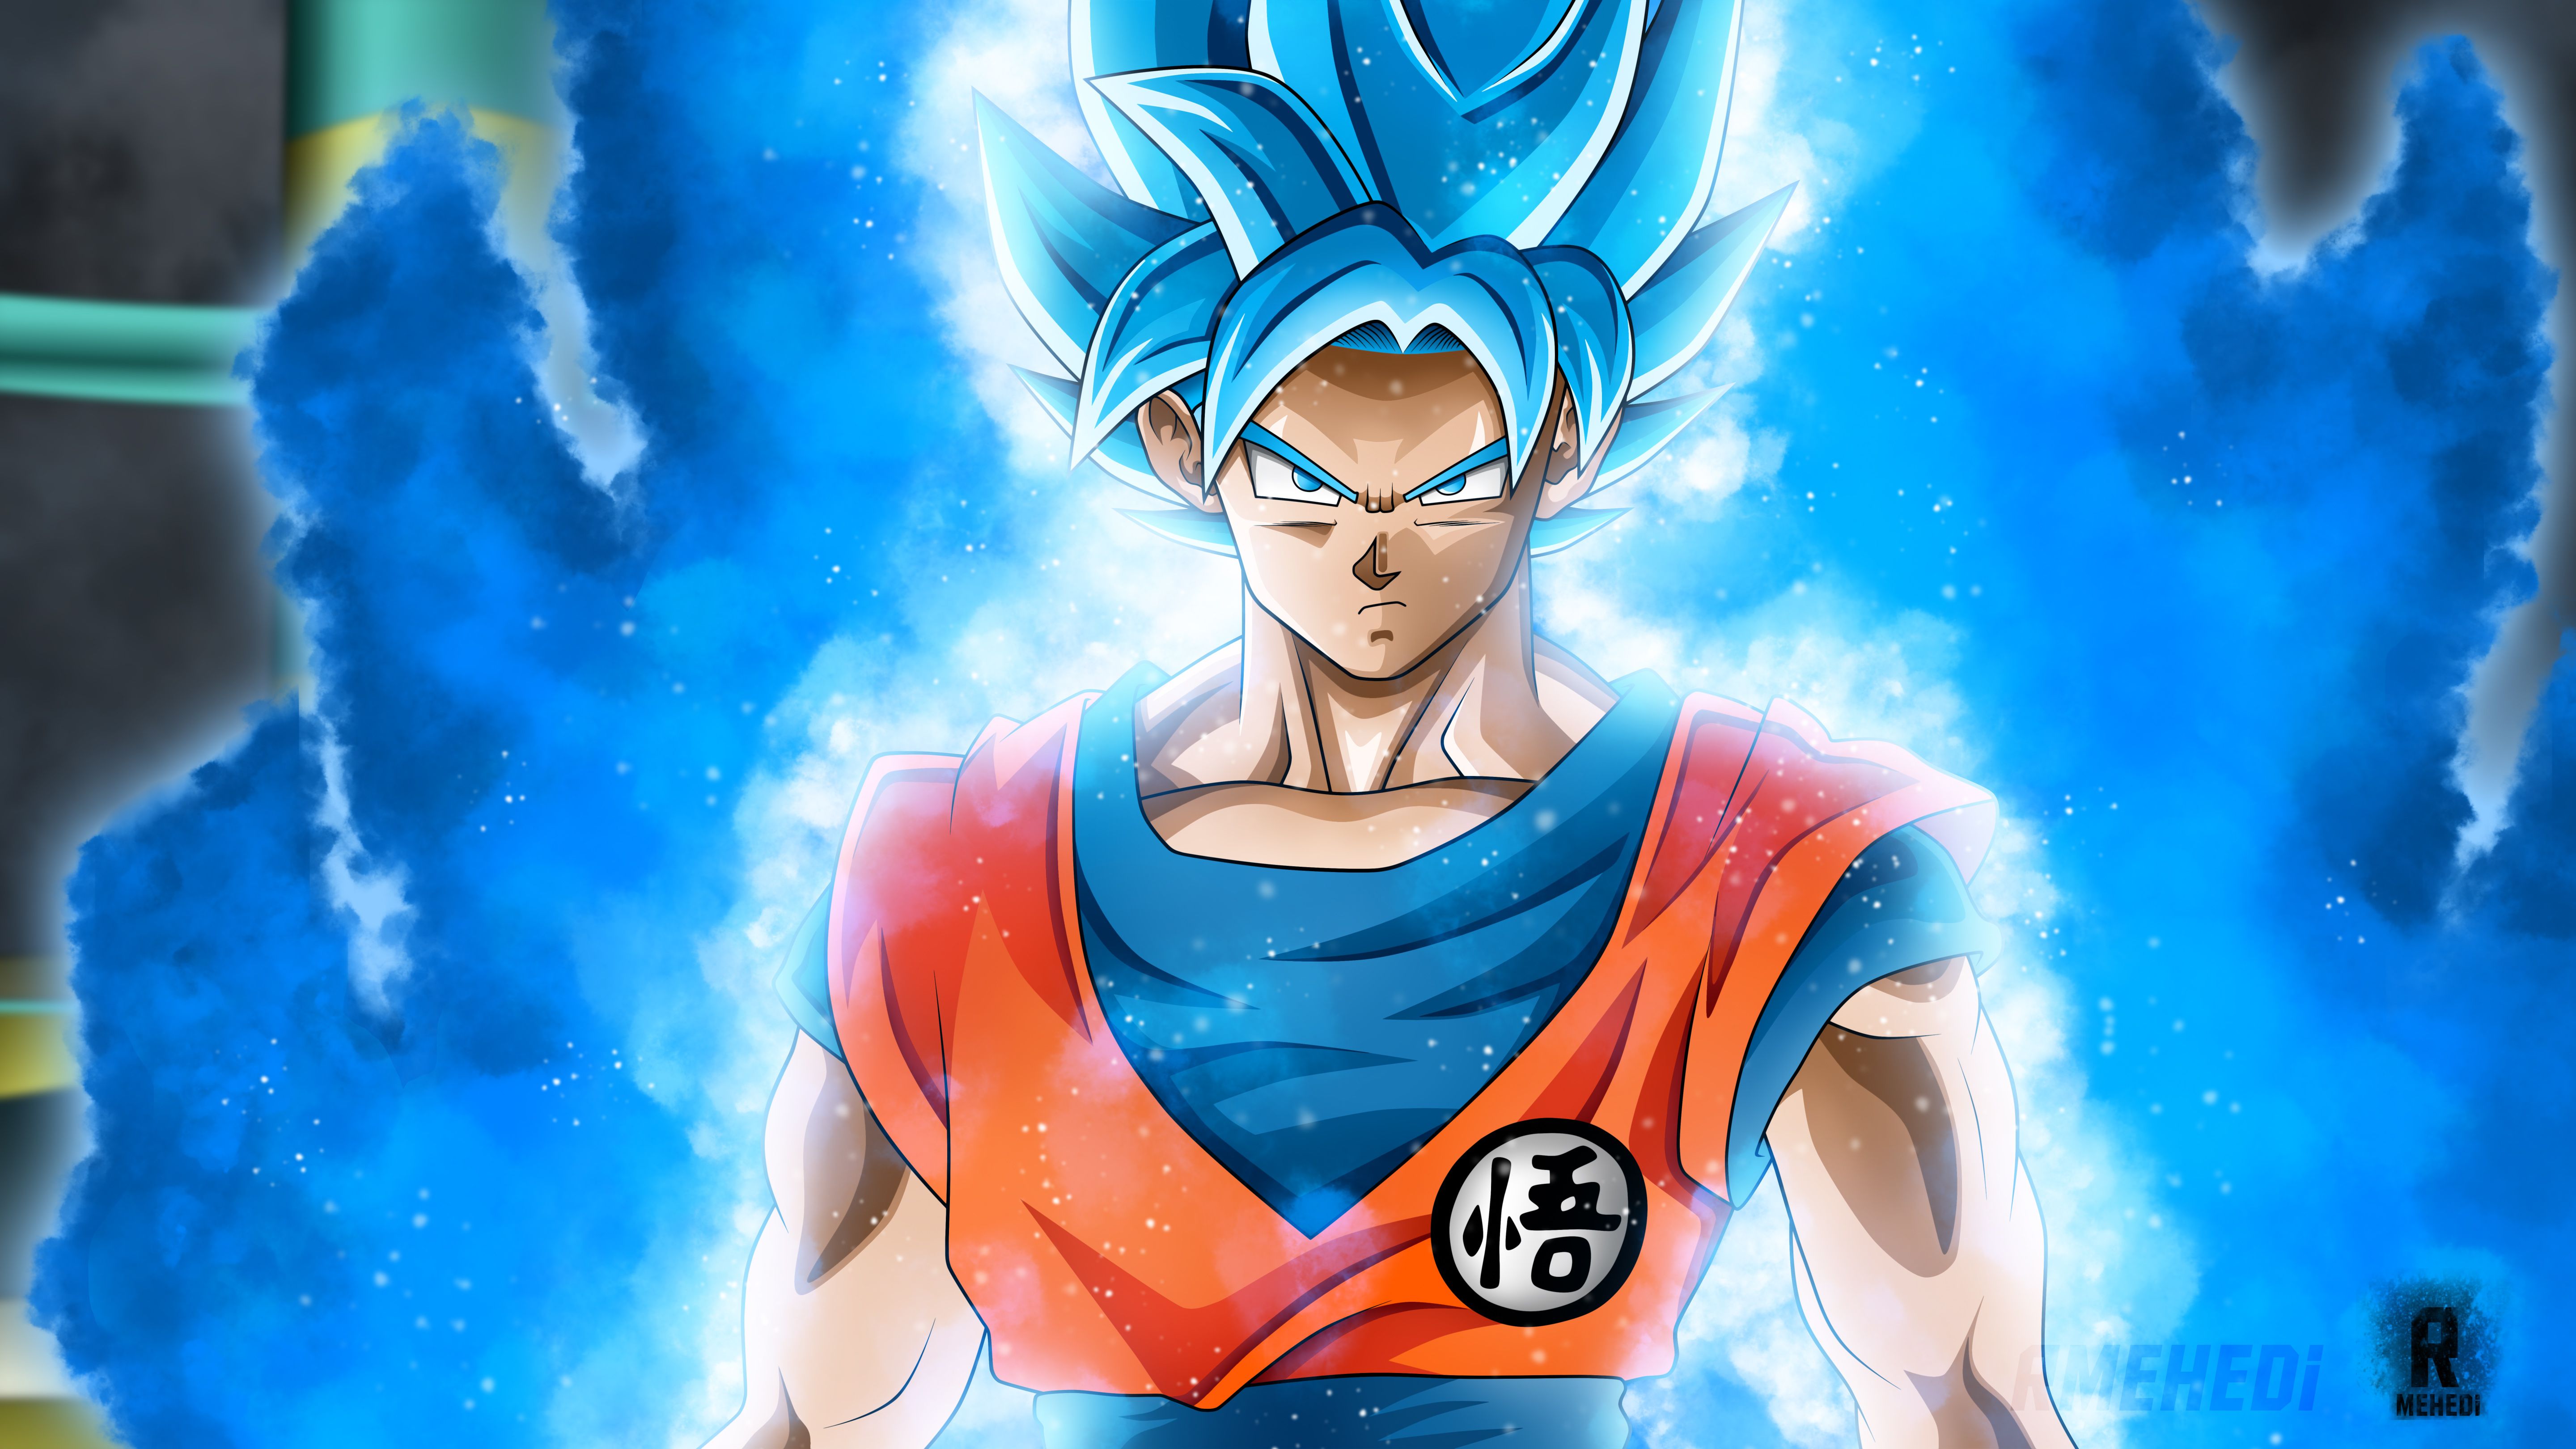 Dragon ball goku wallpapers hd k k for pc and mobile download free images for iphone android